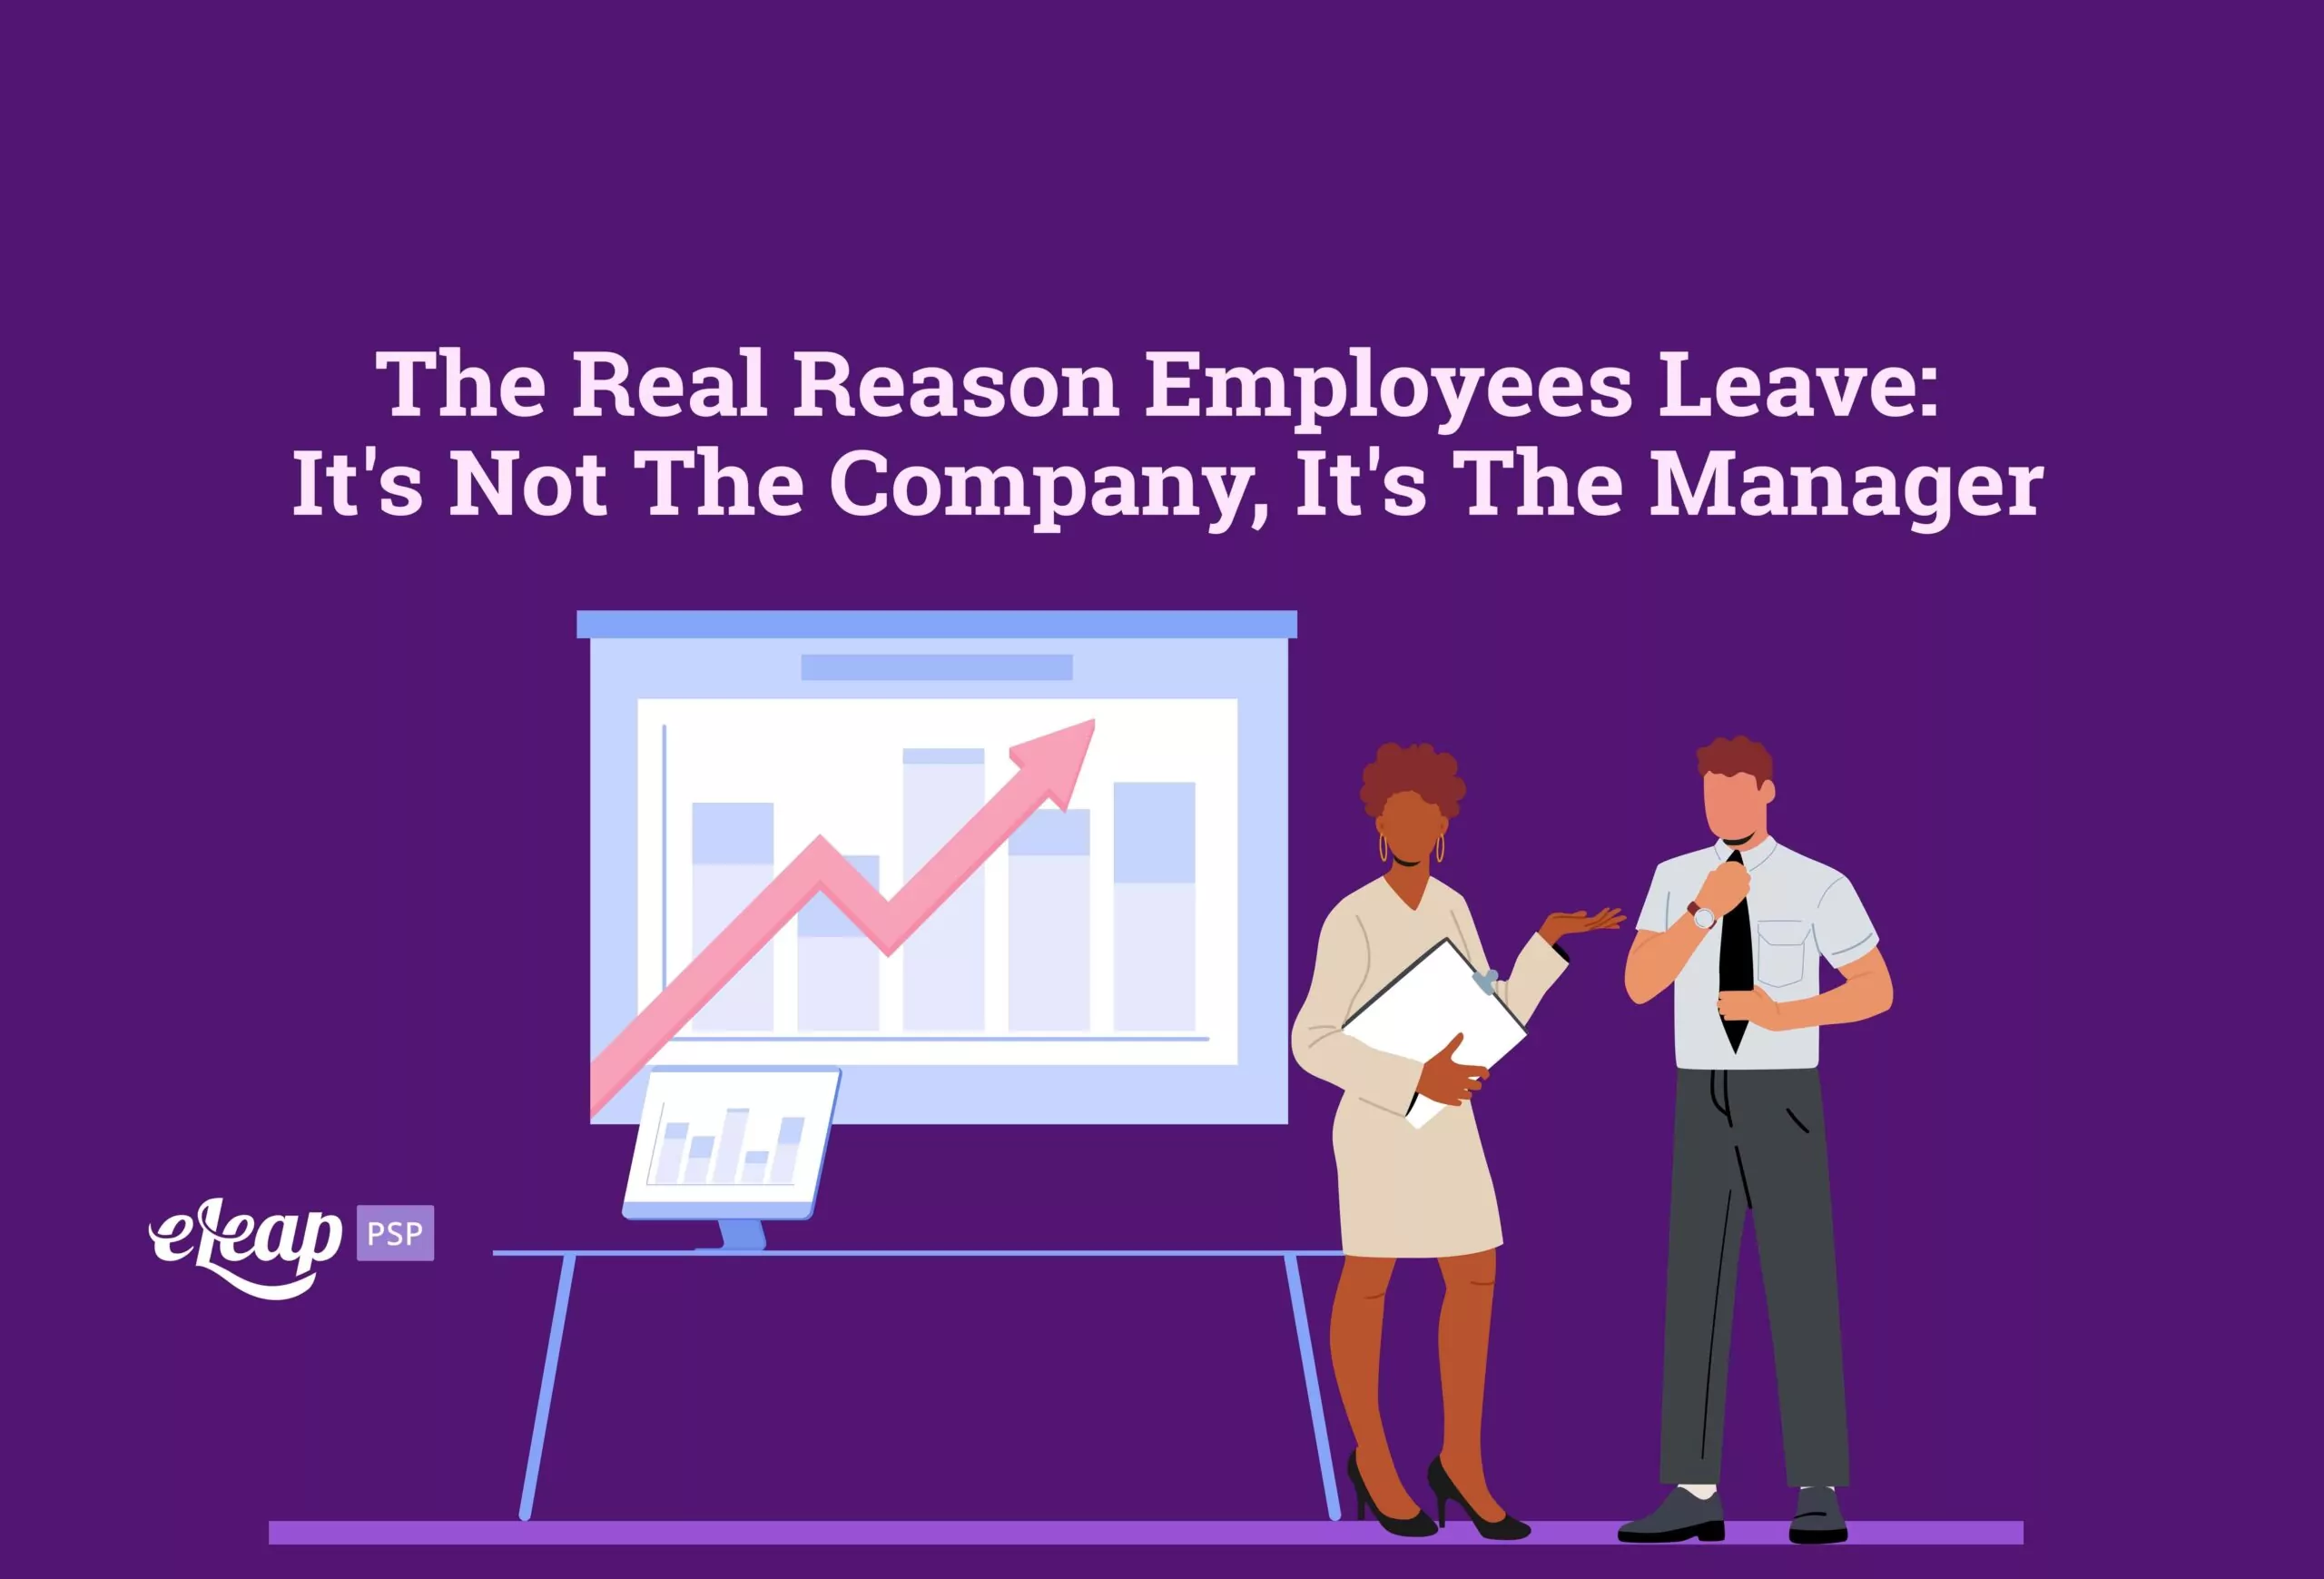 The Real Reason Employees Leave: It's Not The Company, It's The Manager